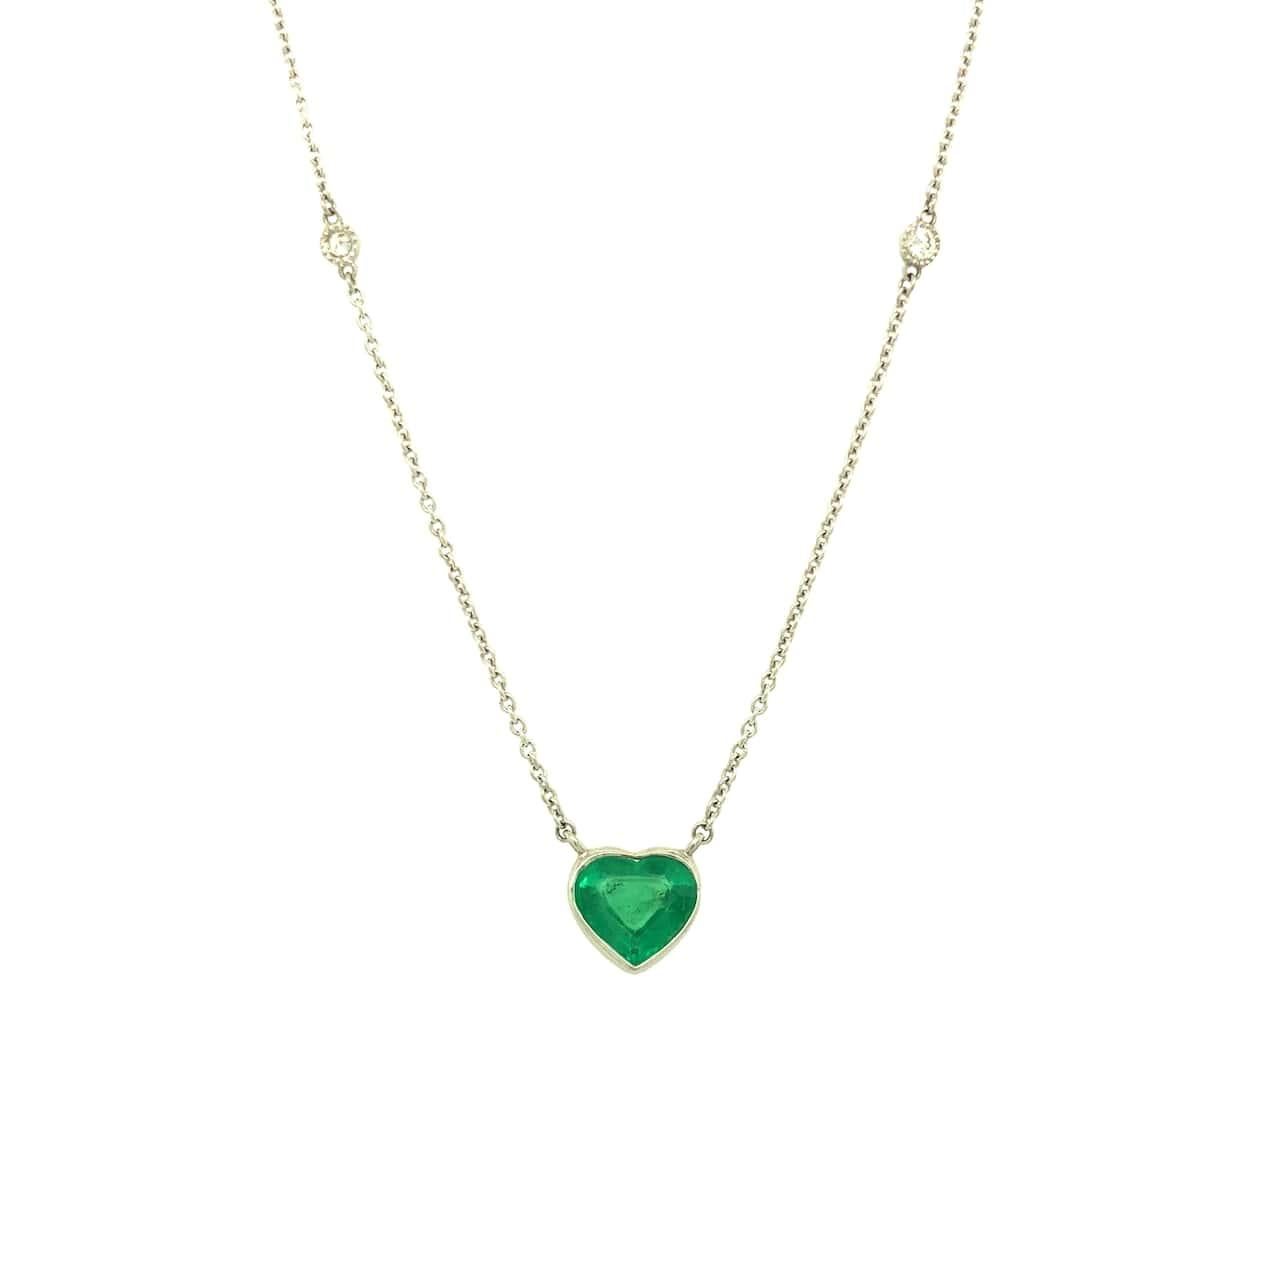 Heart Cut Gems Are Forever 1.18 Carat Heart Shaped Emerald and Diamond Platinum Necklace For Sale